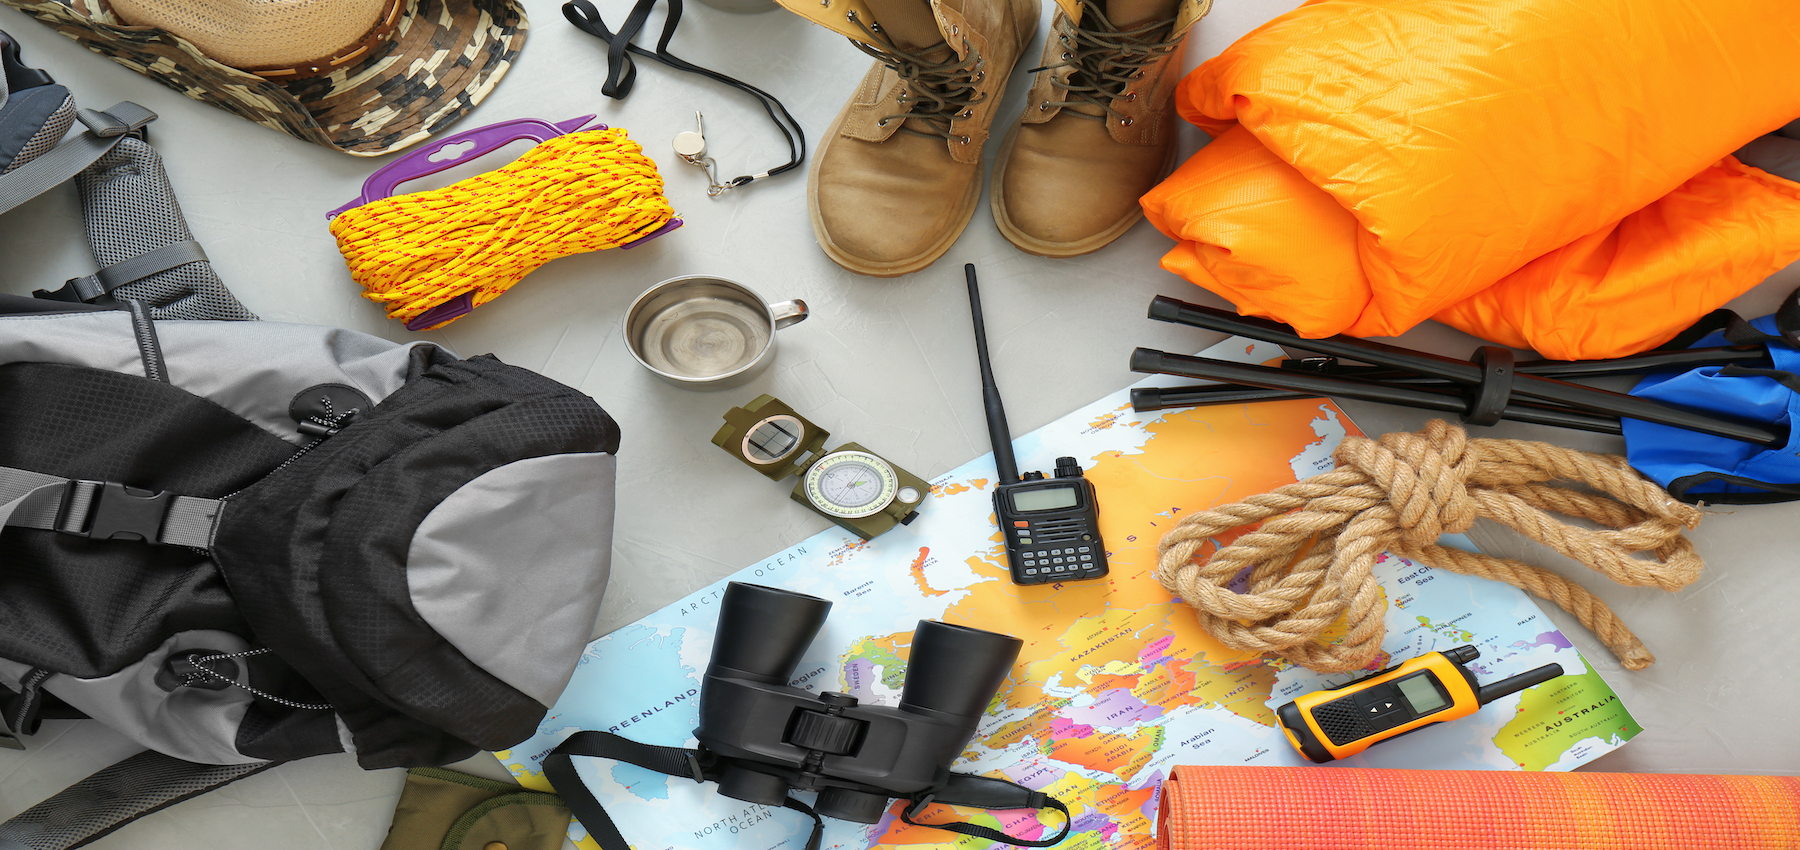 32 must have prepper gear items